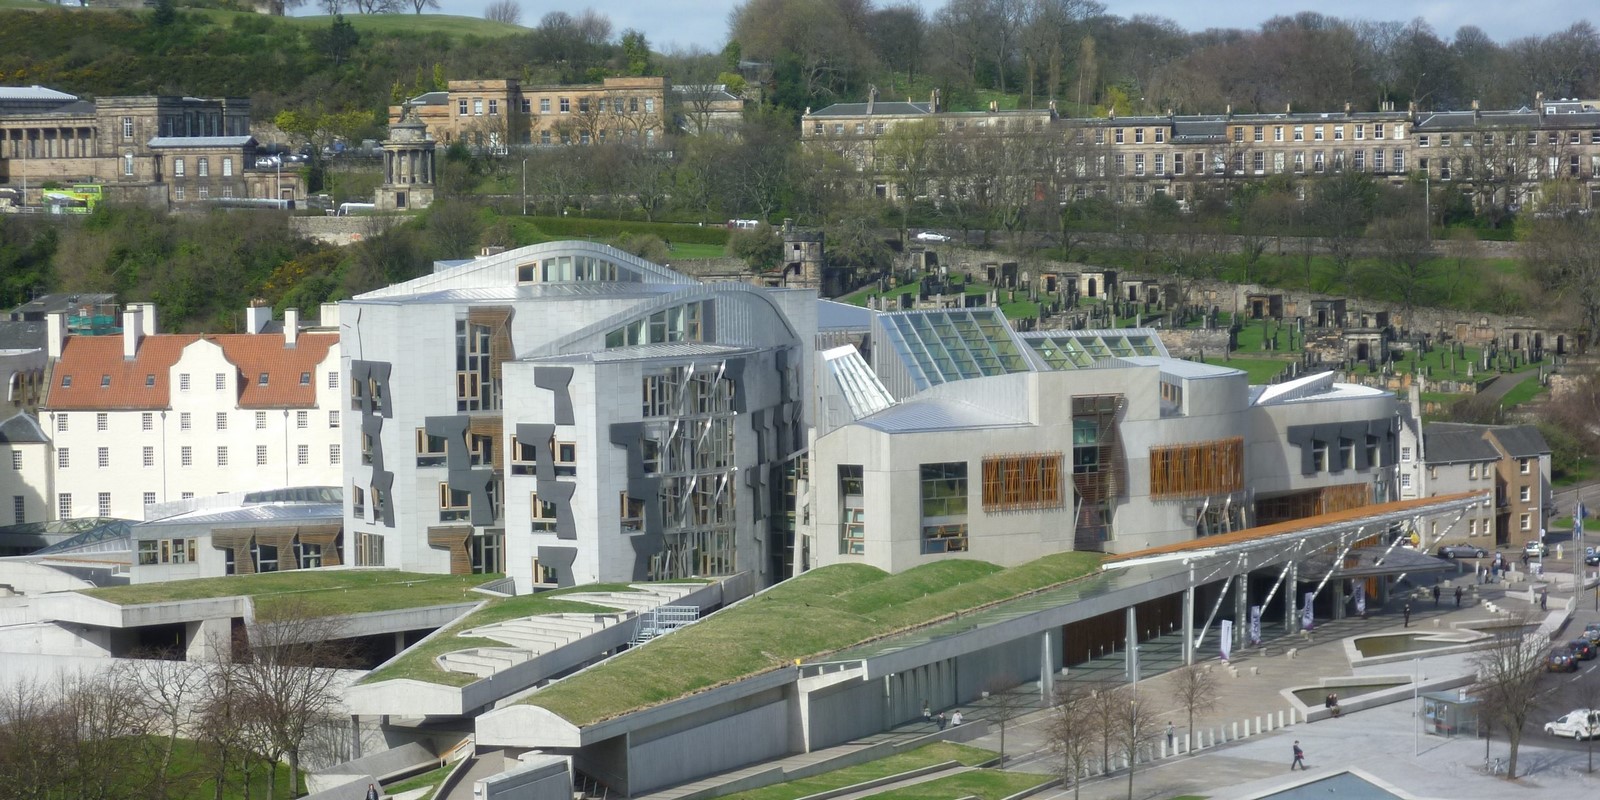 Scottish Parliament Building, Edinburgh: An epitome of materiality by Enric Miralles - Sheet2